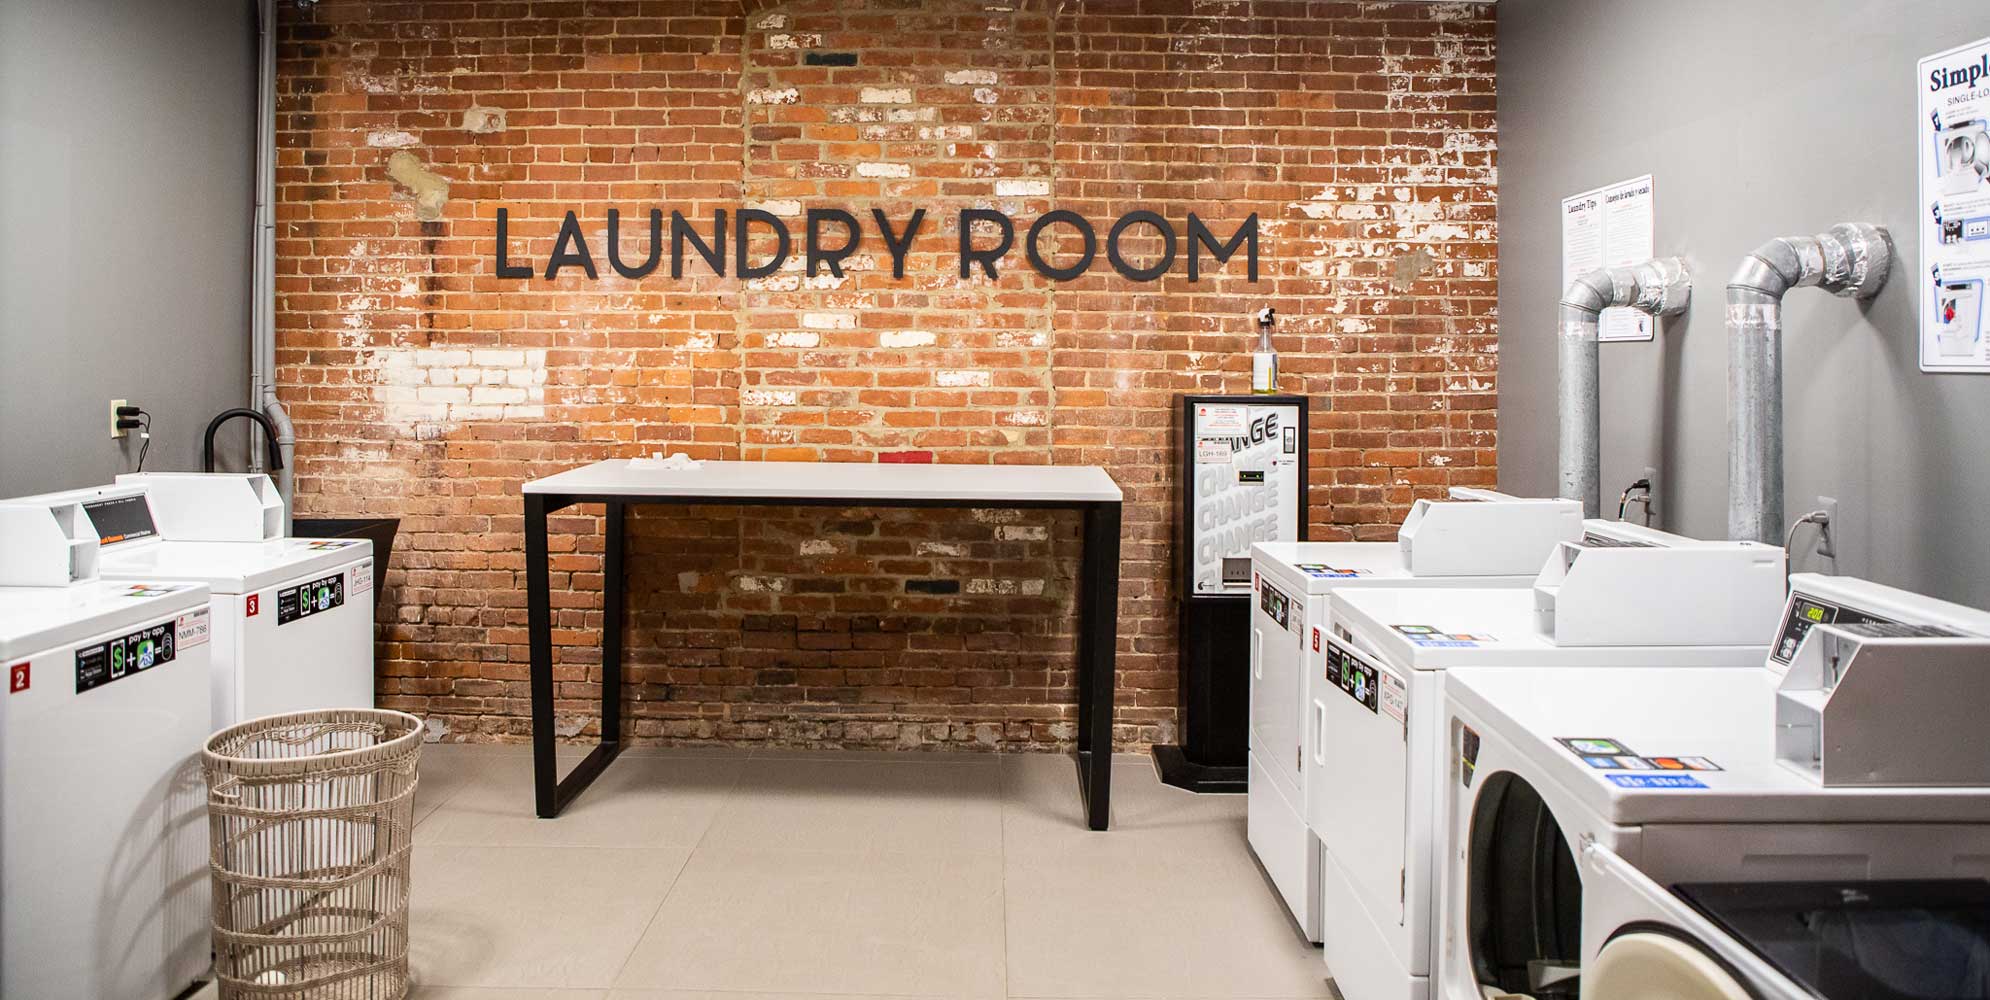 Laundry Room at The Warehouse Apartments